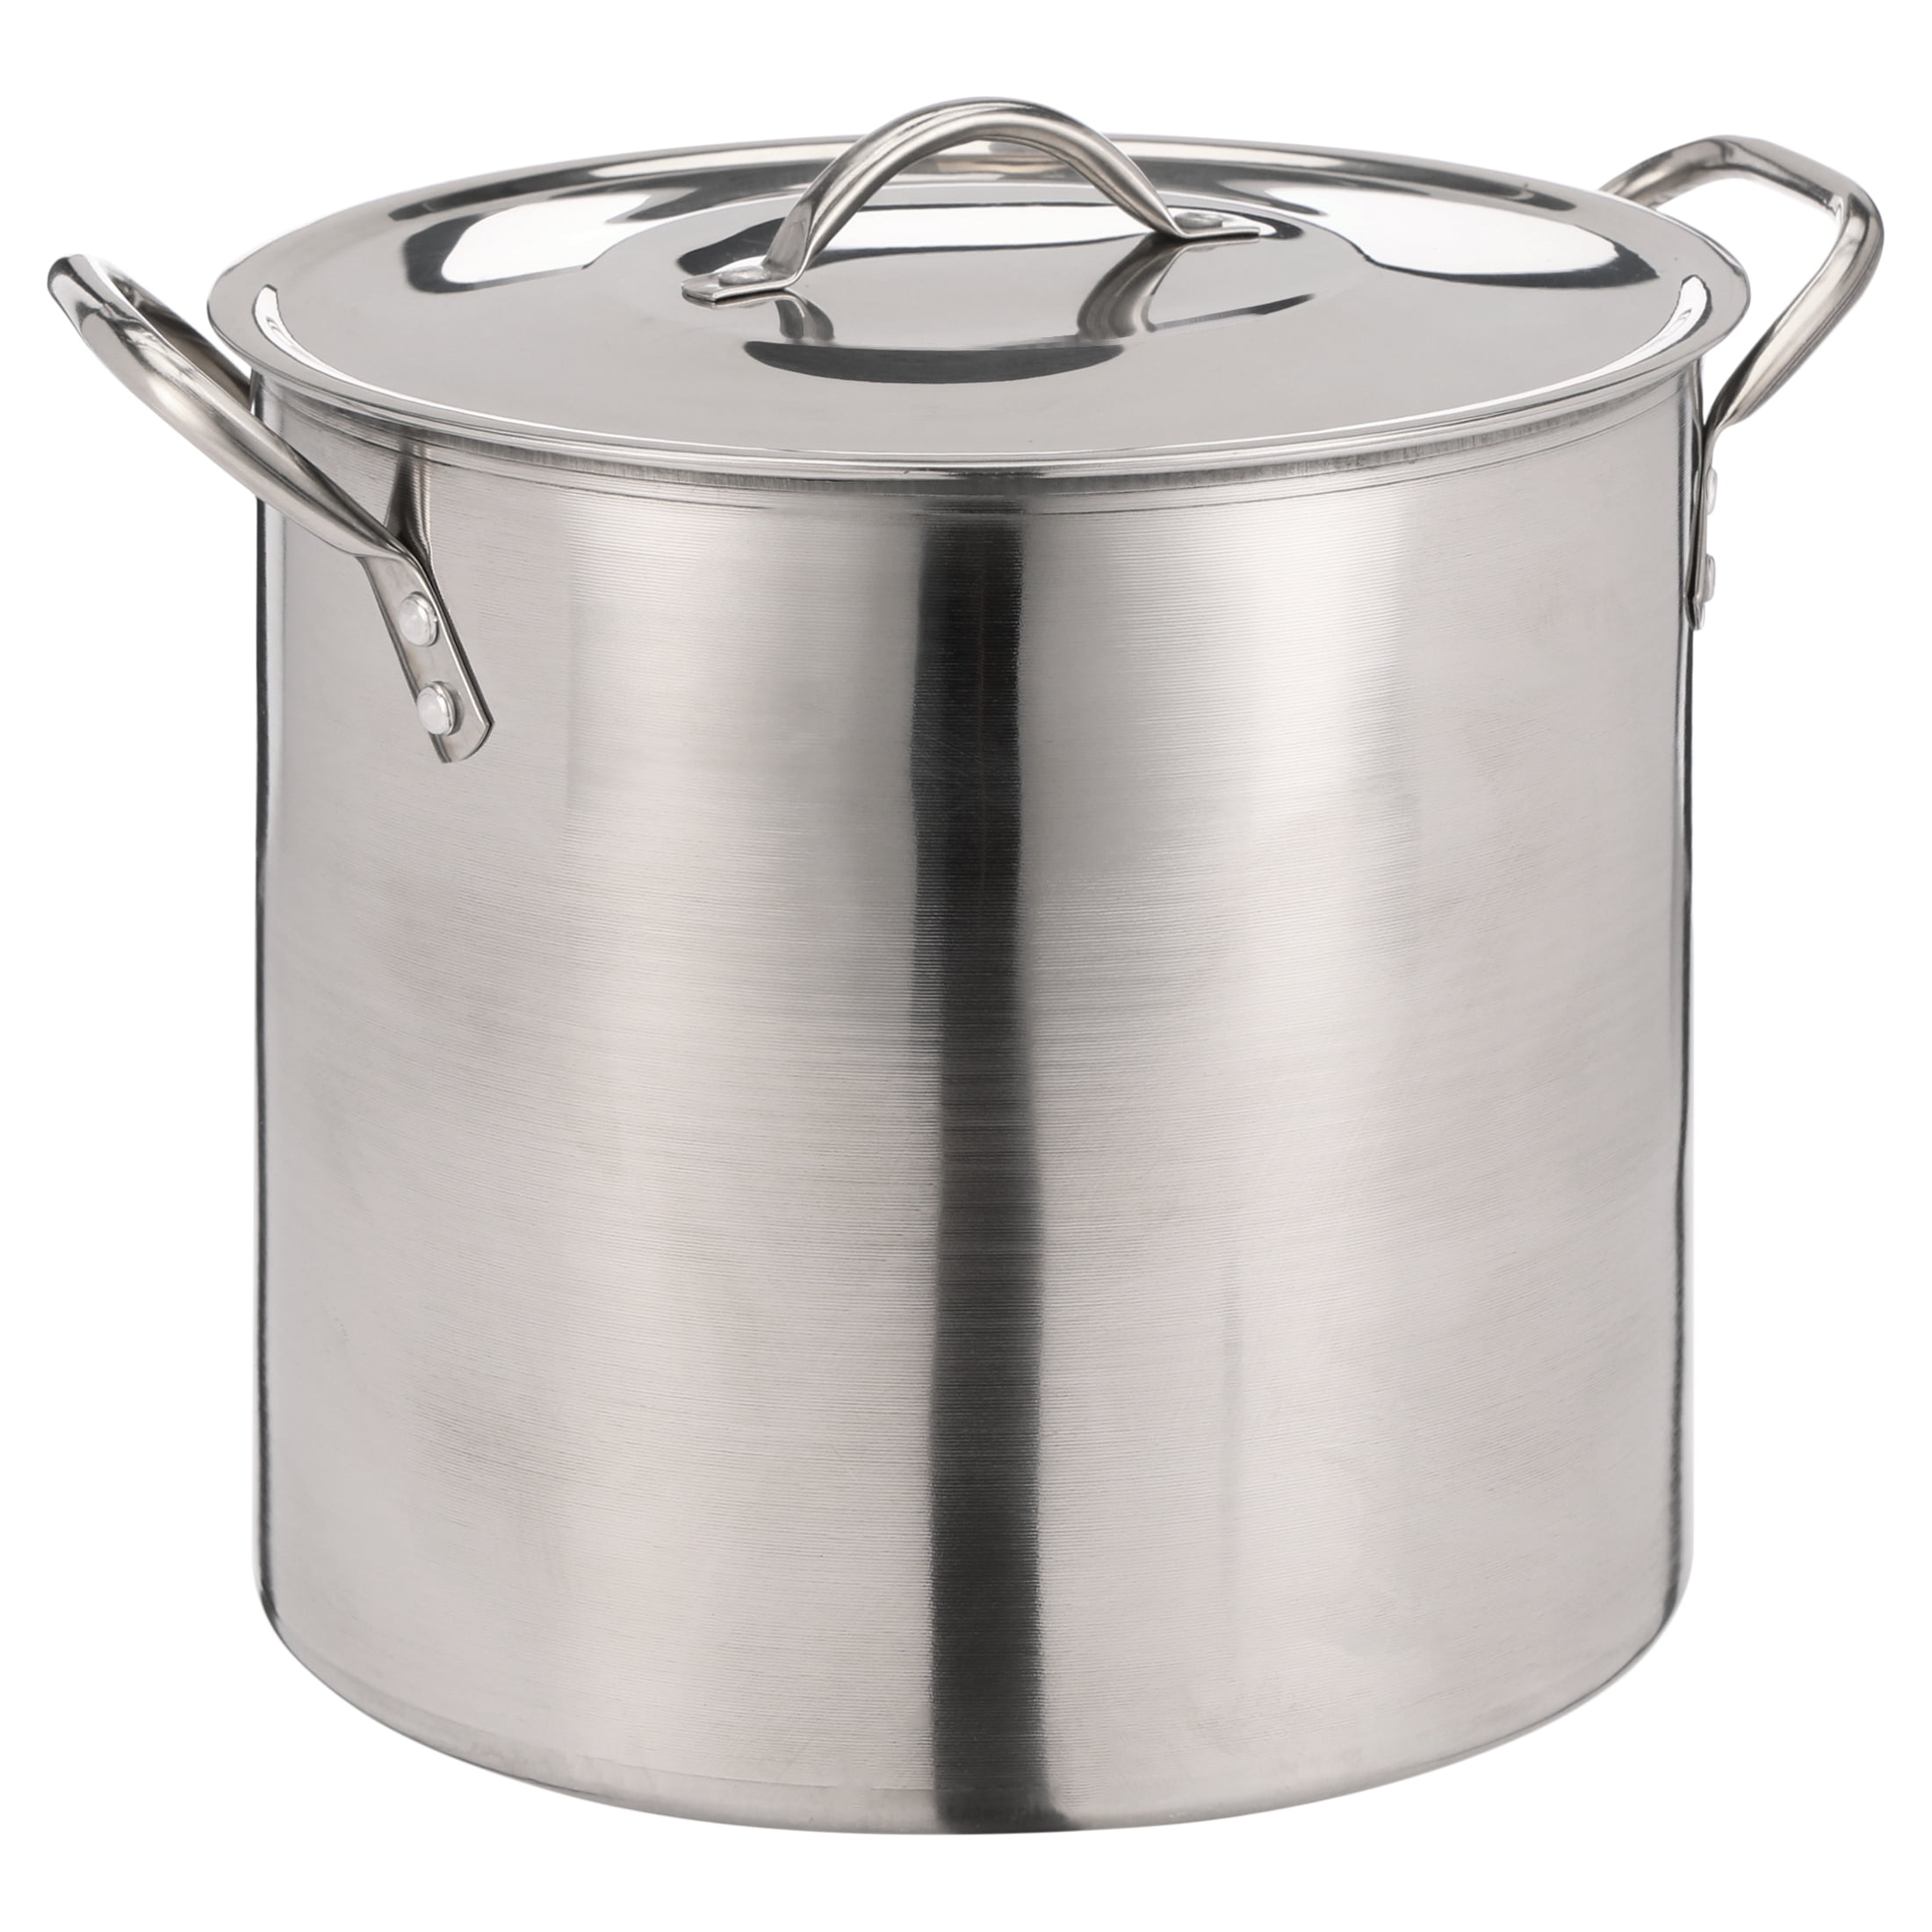 Mainstays Stainless Steel 12-Quart Stock Pot with Glass Lid